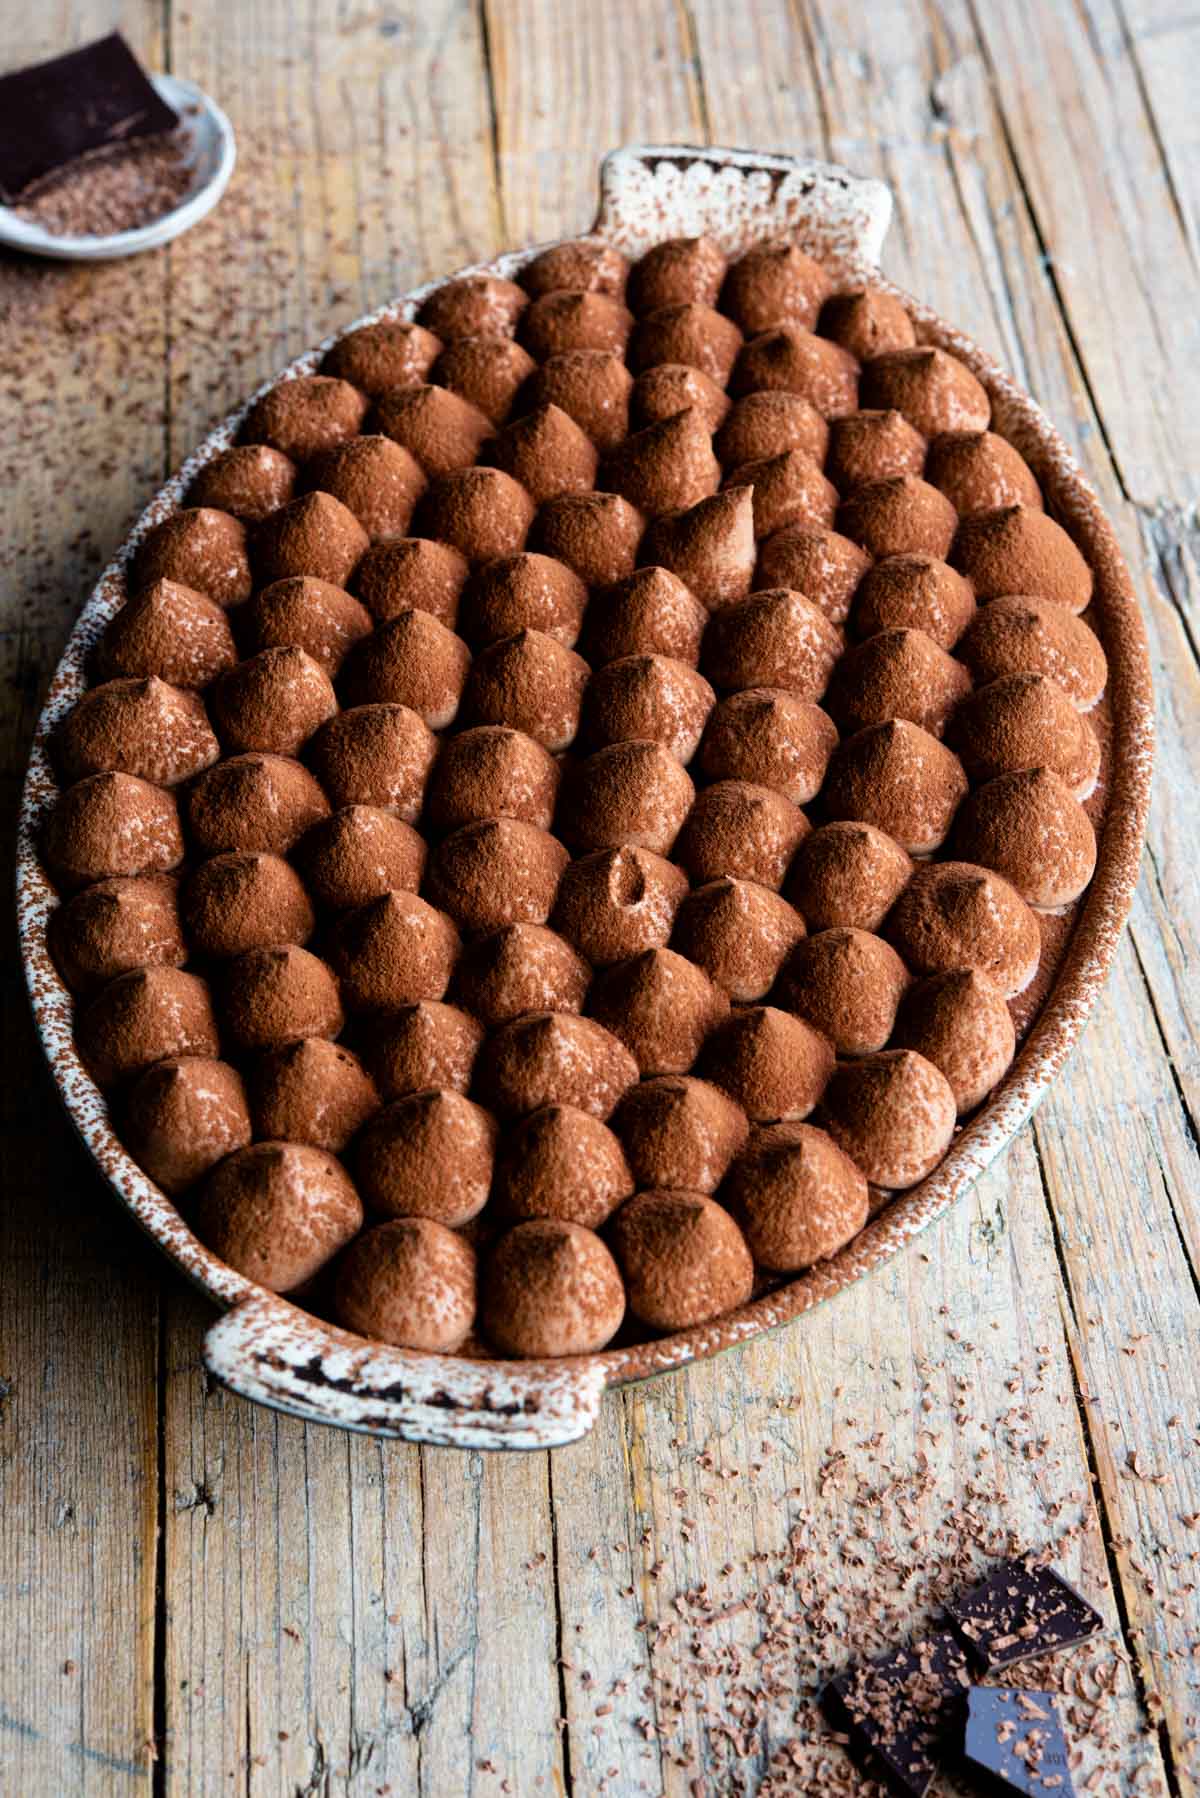 Chocolate tiramisu in an oval dish sitting on a rustic wooden background with pieces of chocolate at the side